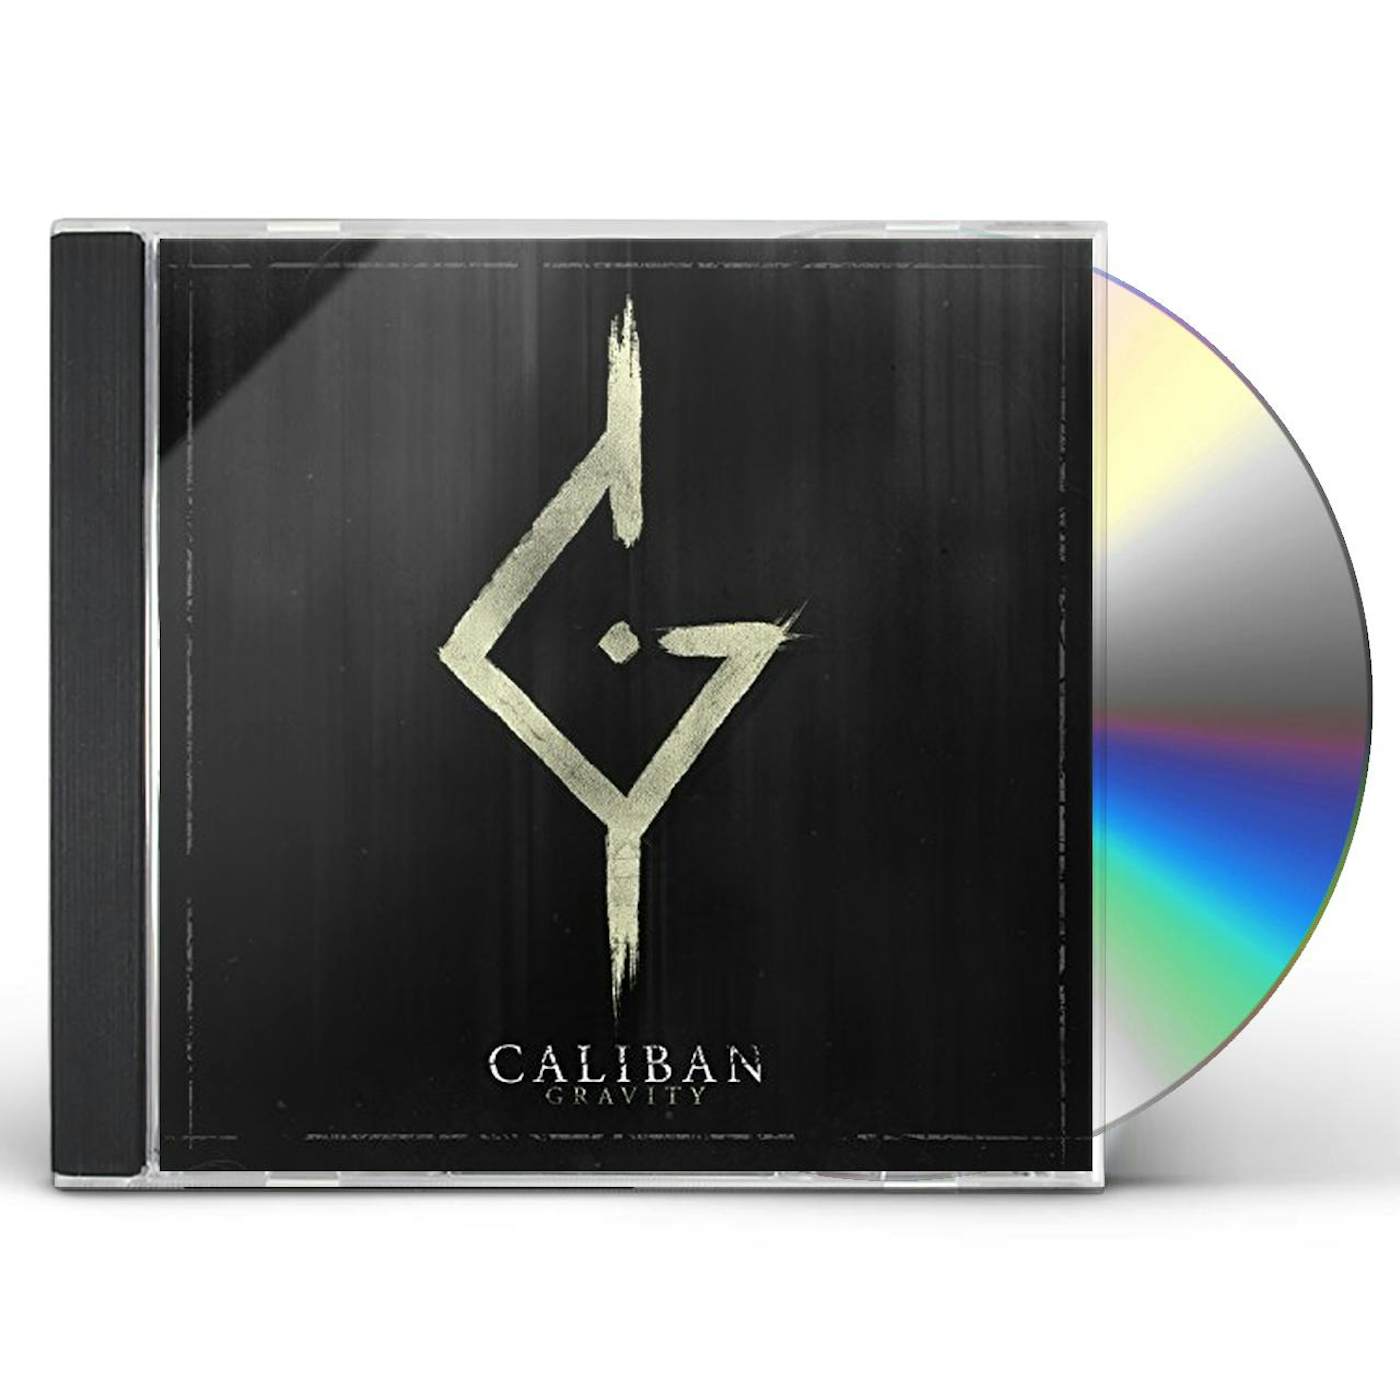 Caliban GRAVITY: DELUXE EDITION CD